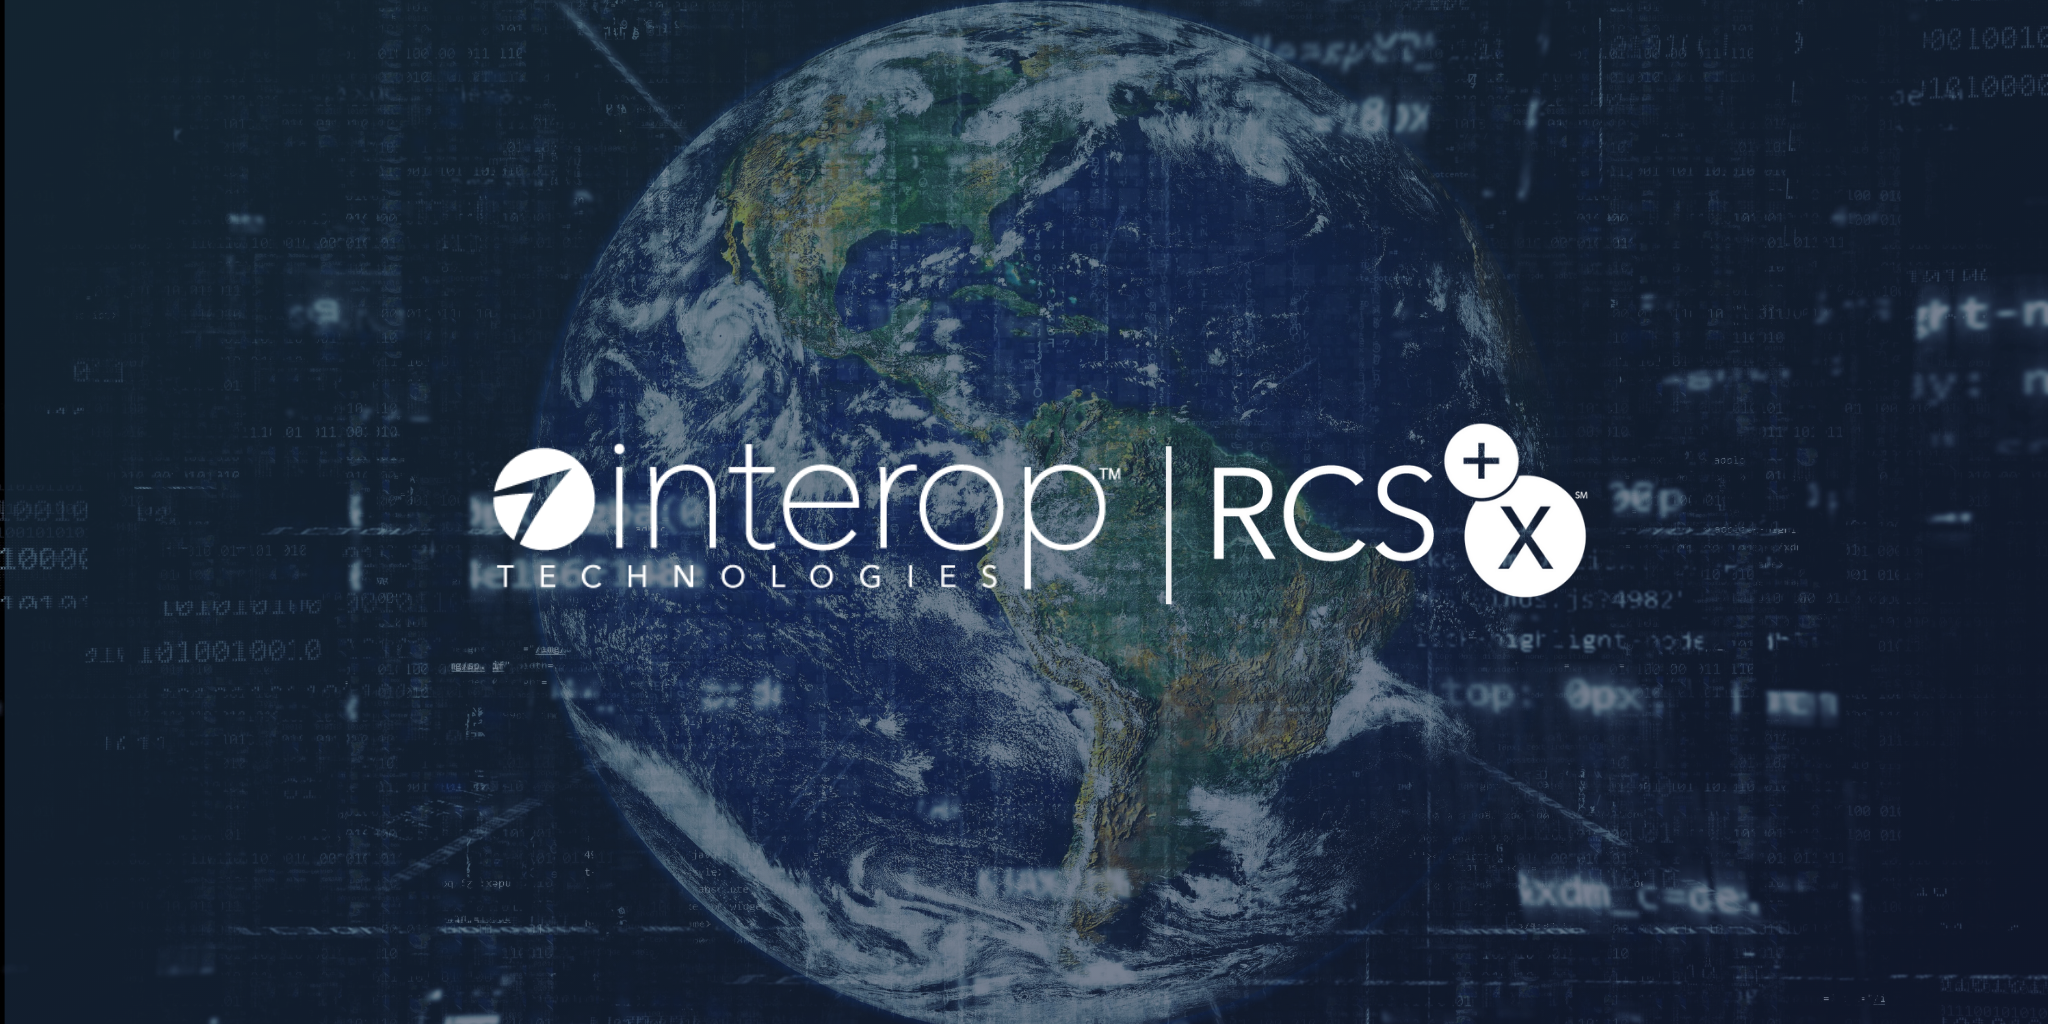 Interop RCS Accredited 2 - Twitter